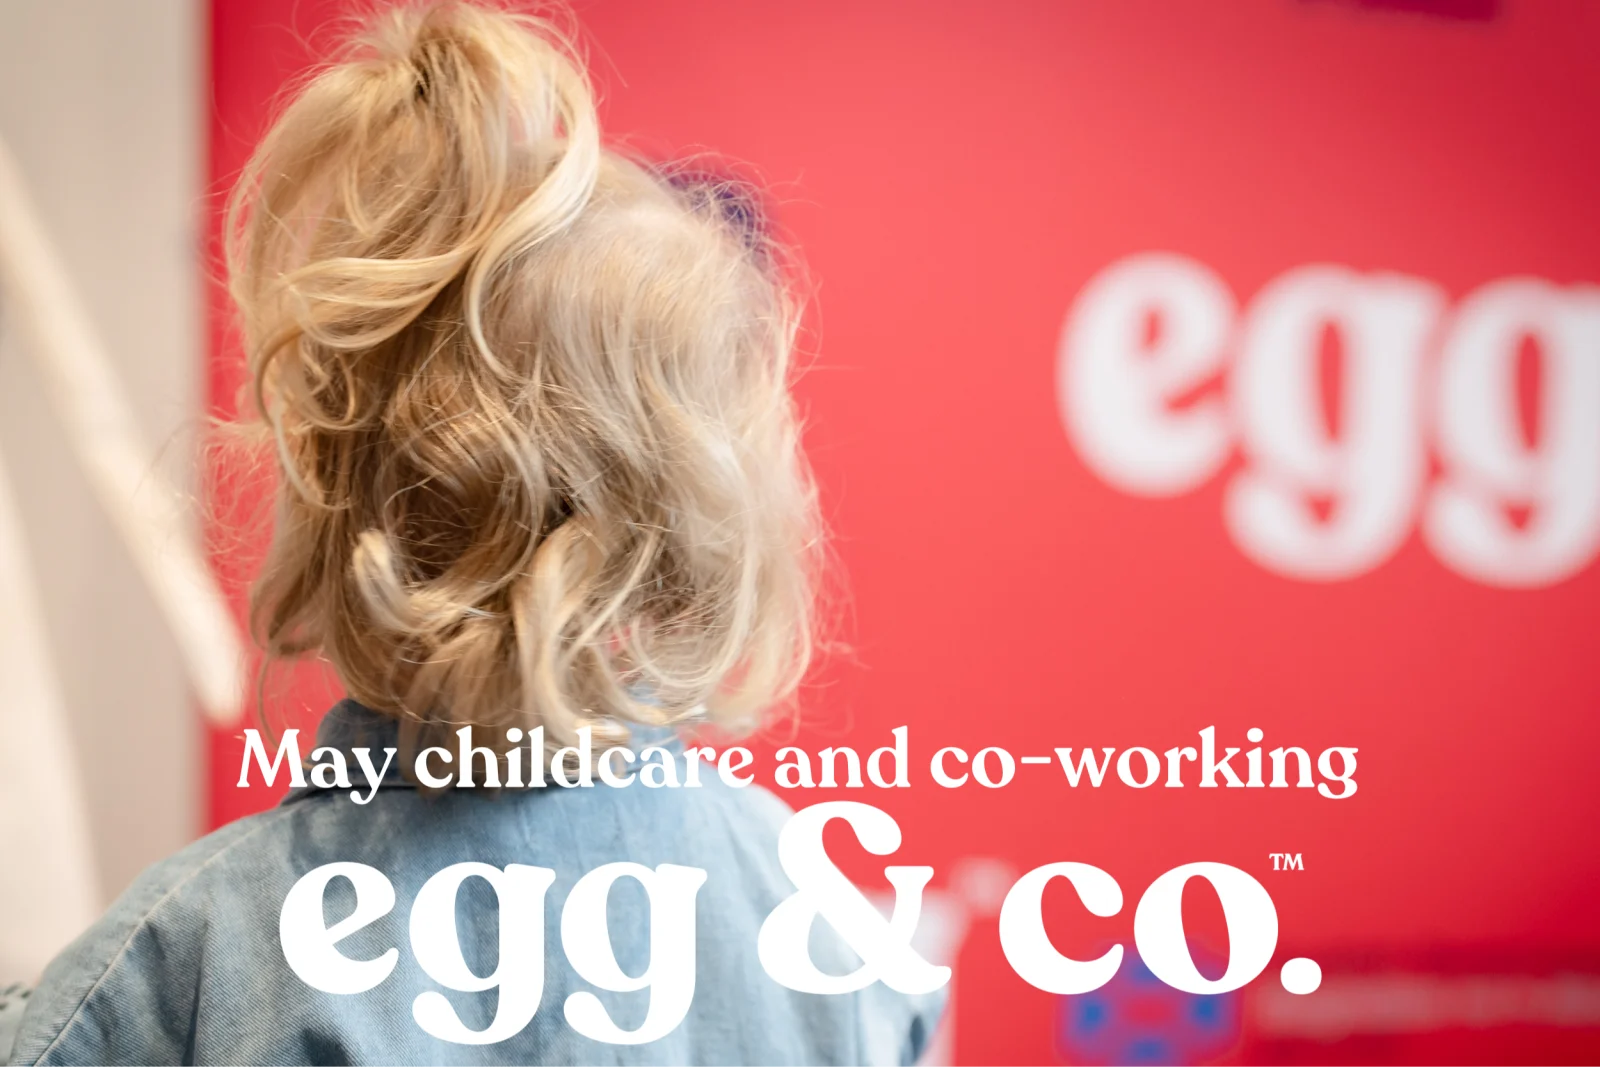 May's co-working childcare day